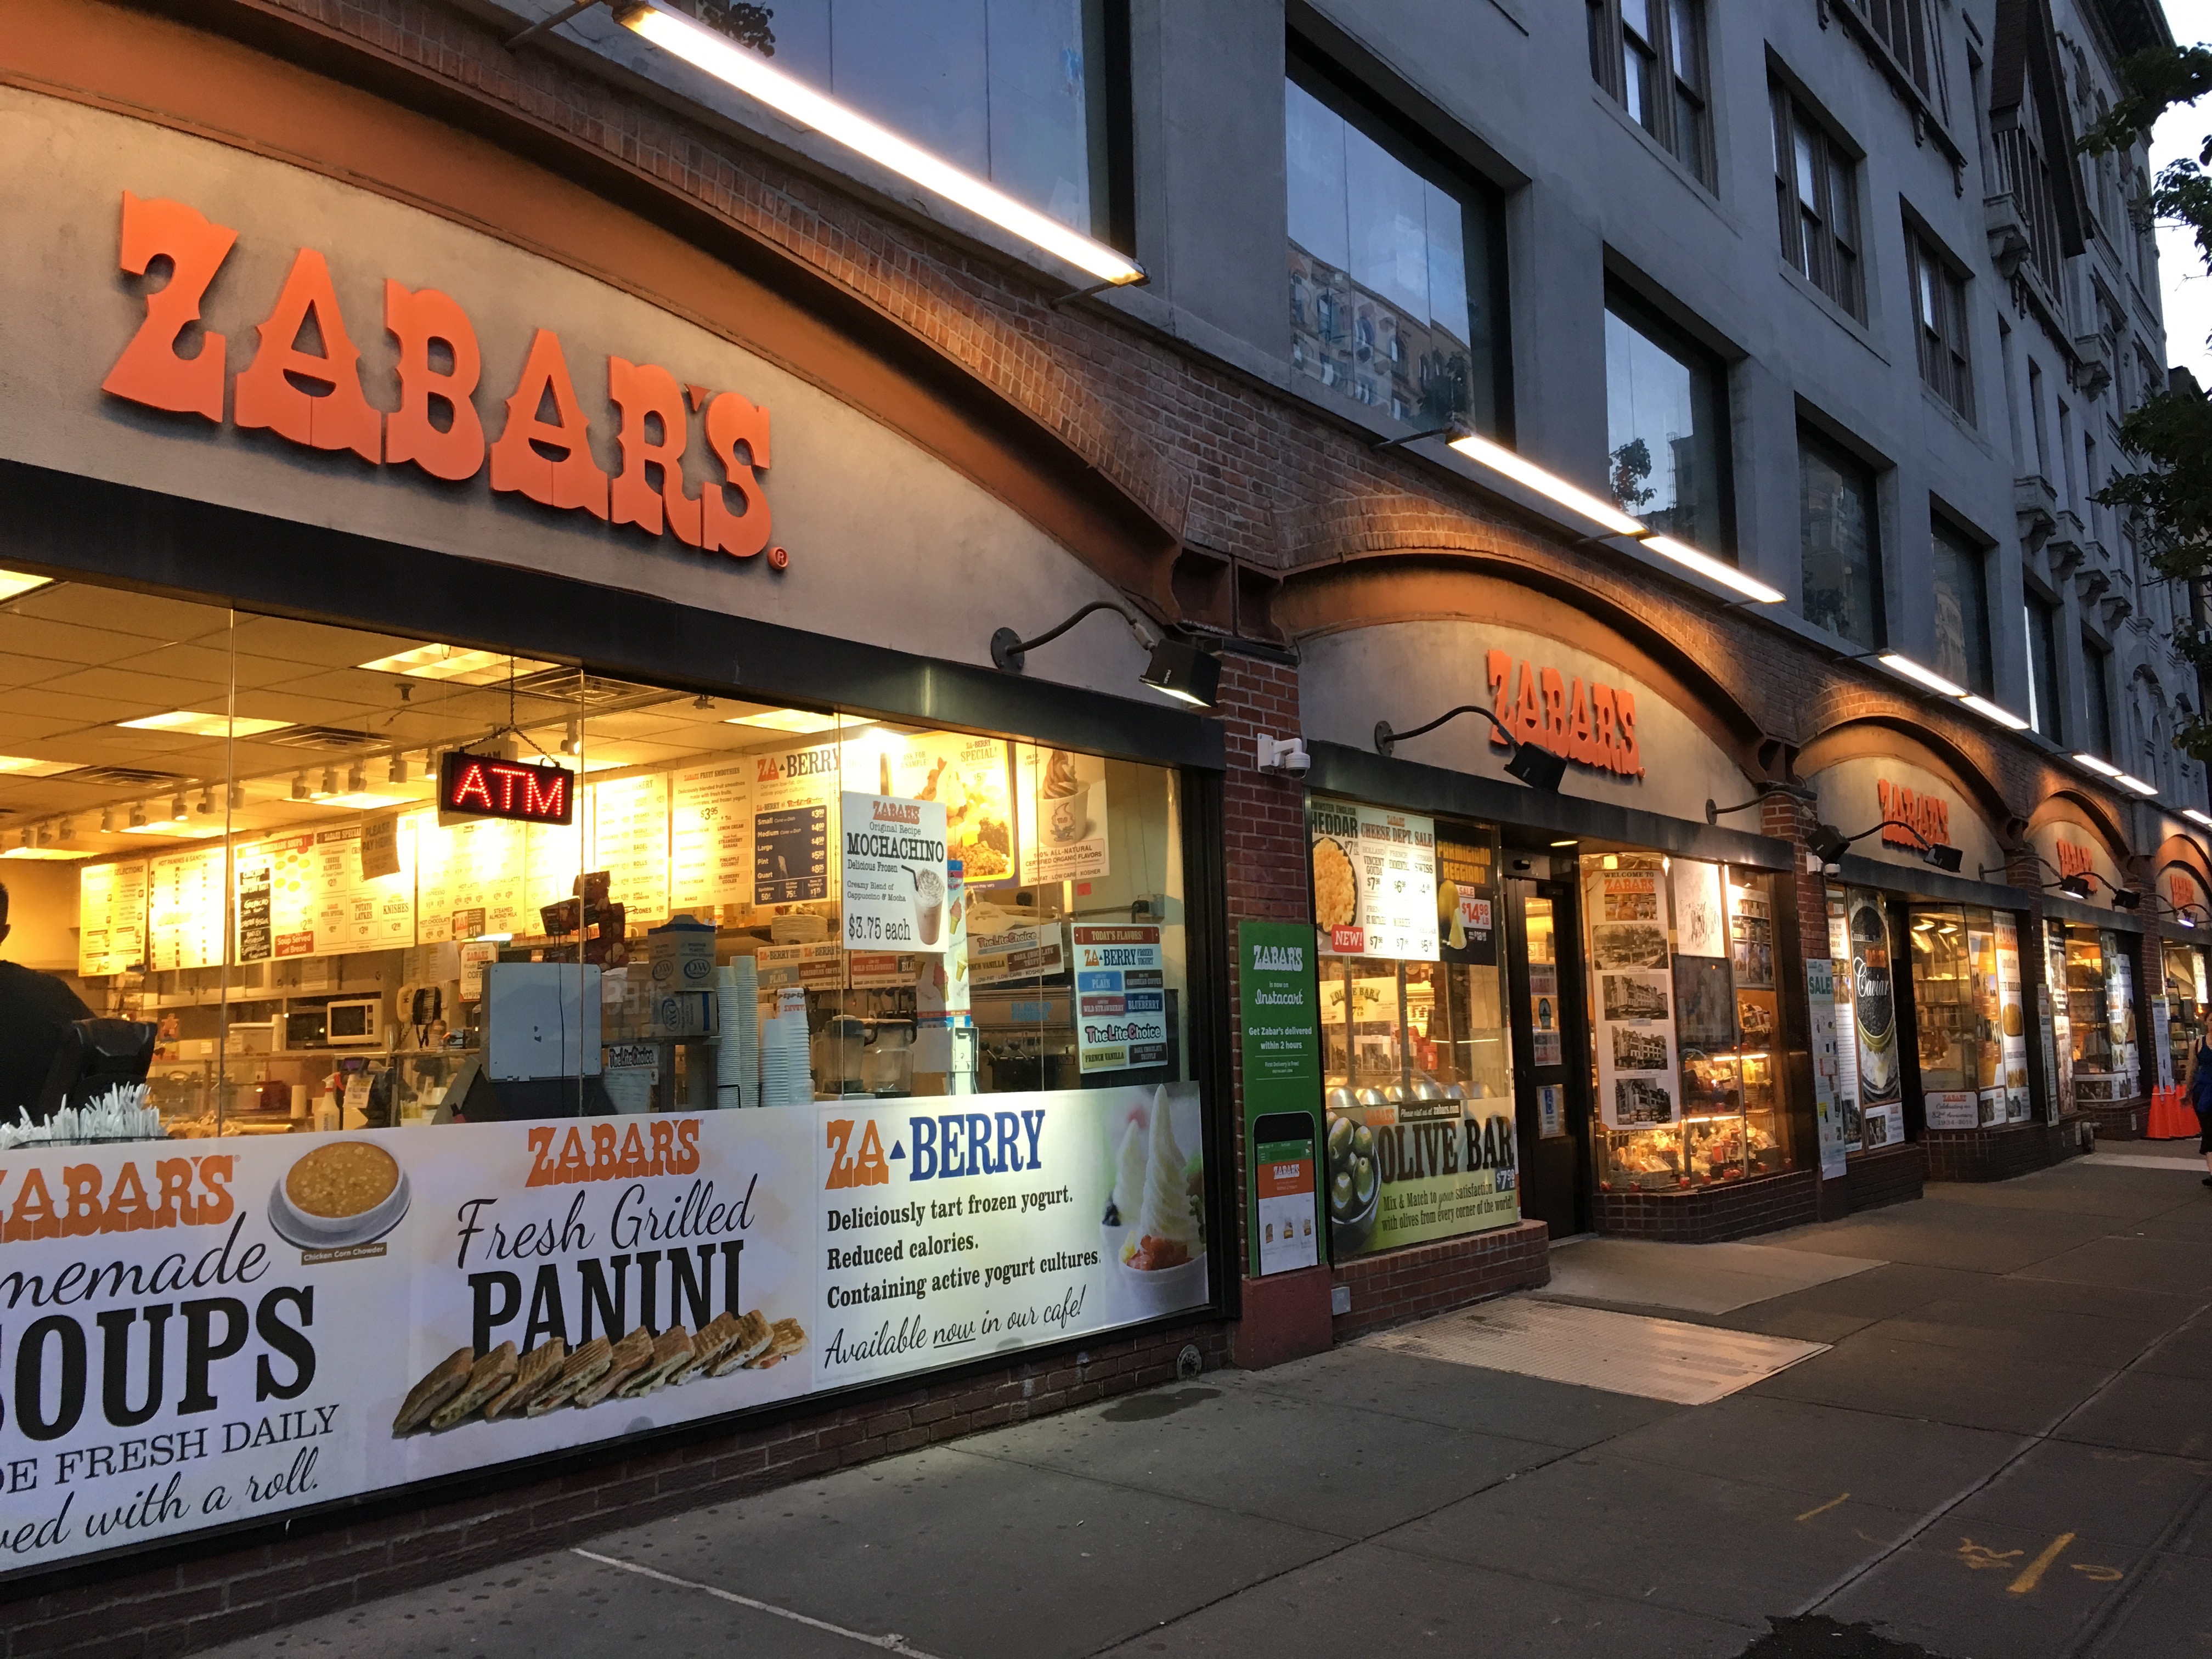 The exterior of deli and grocery store Zabar’s, orange sign illuminated, on the Upper West Side of Manhattan at dusk.